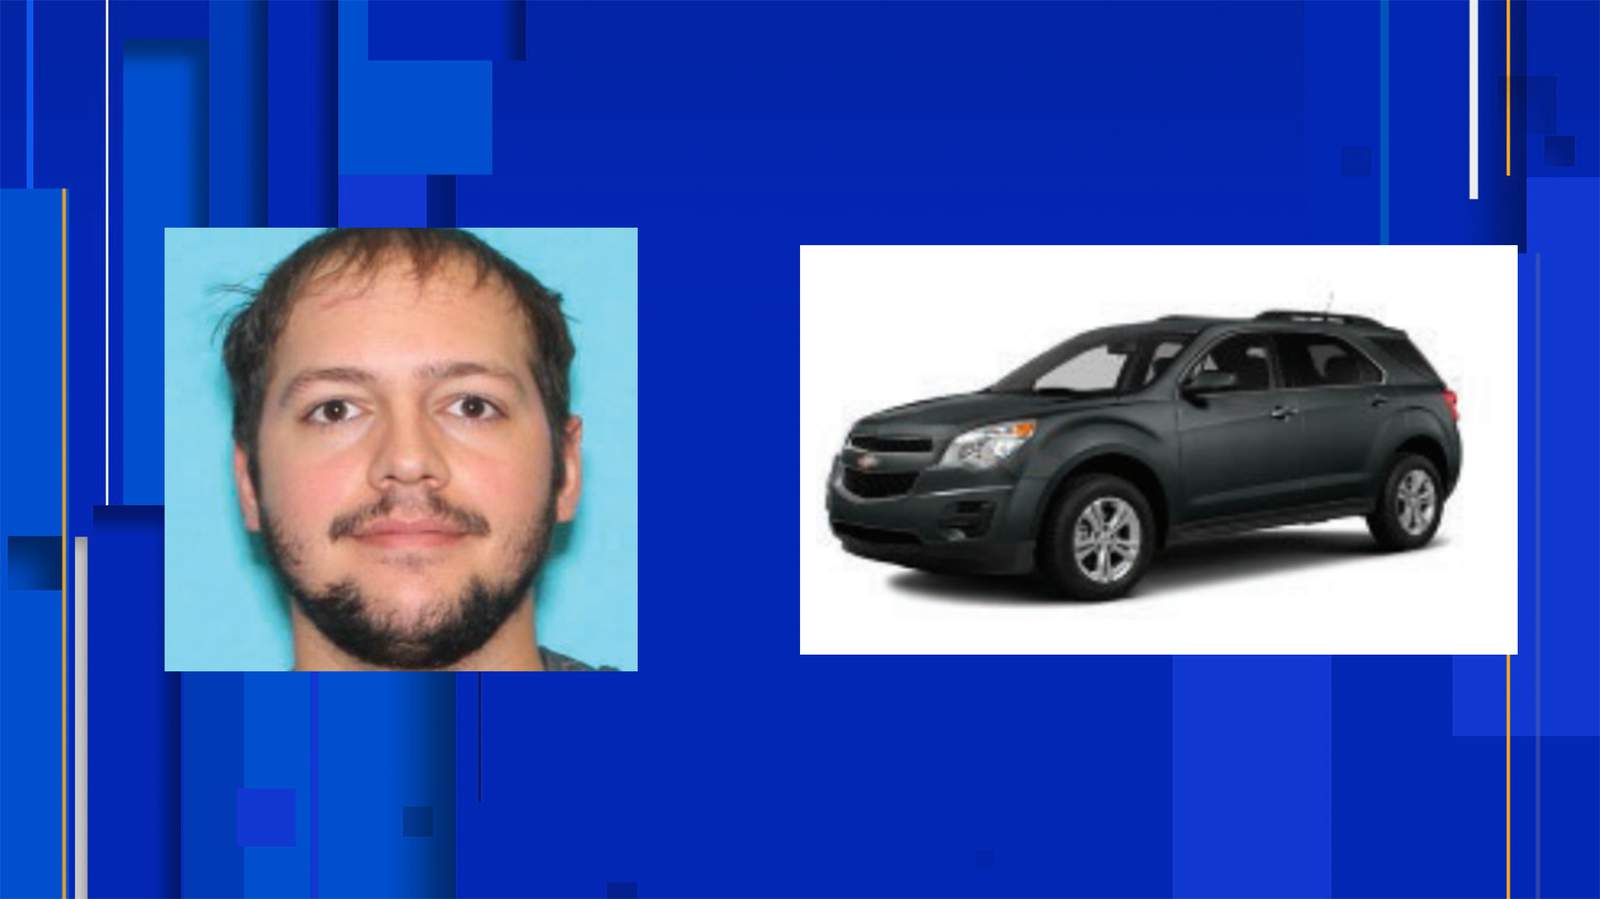 Officials discontinue CLEAR Alert for 28-year-old San Antonio man